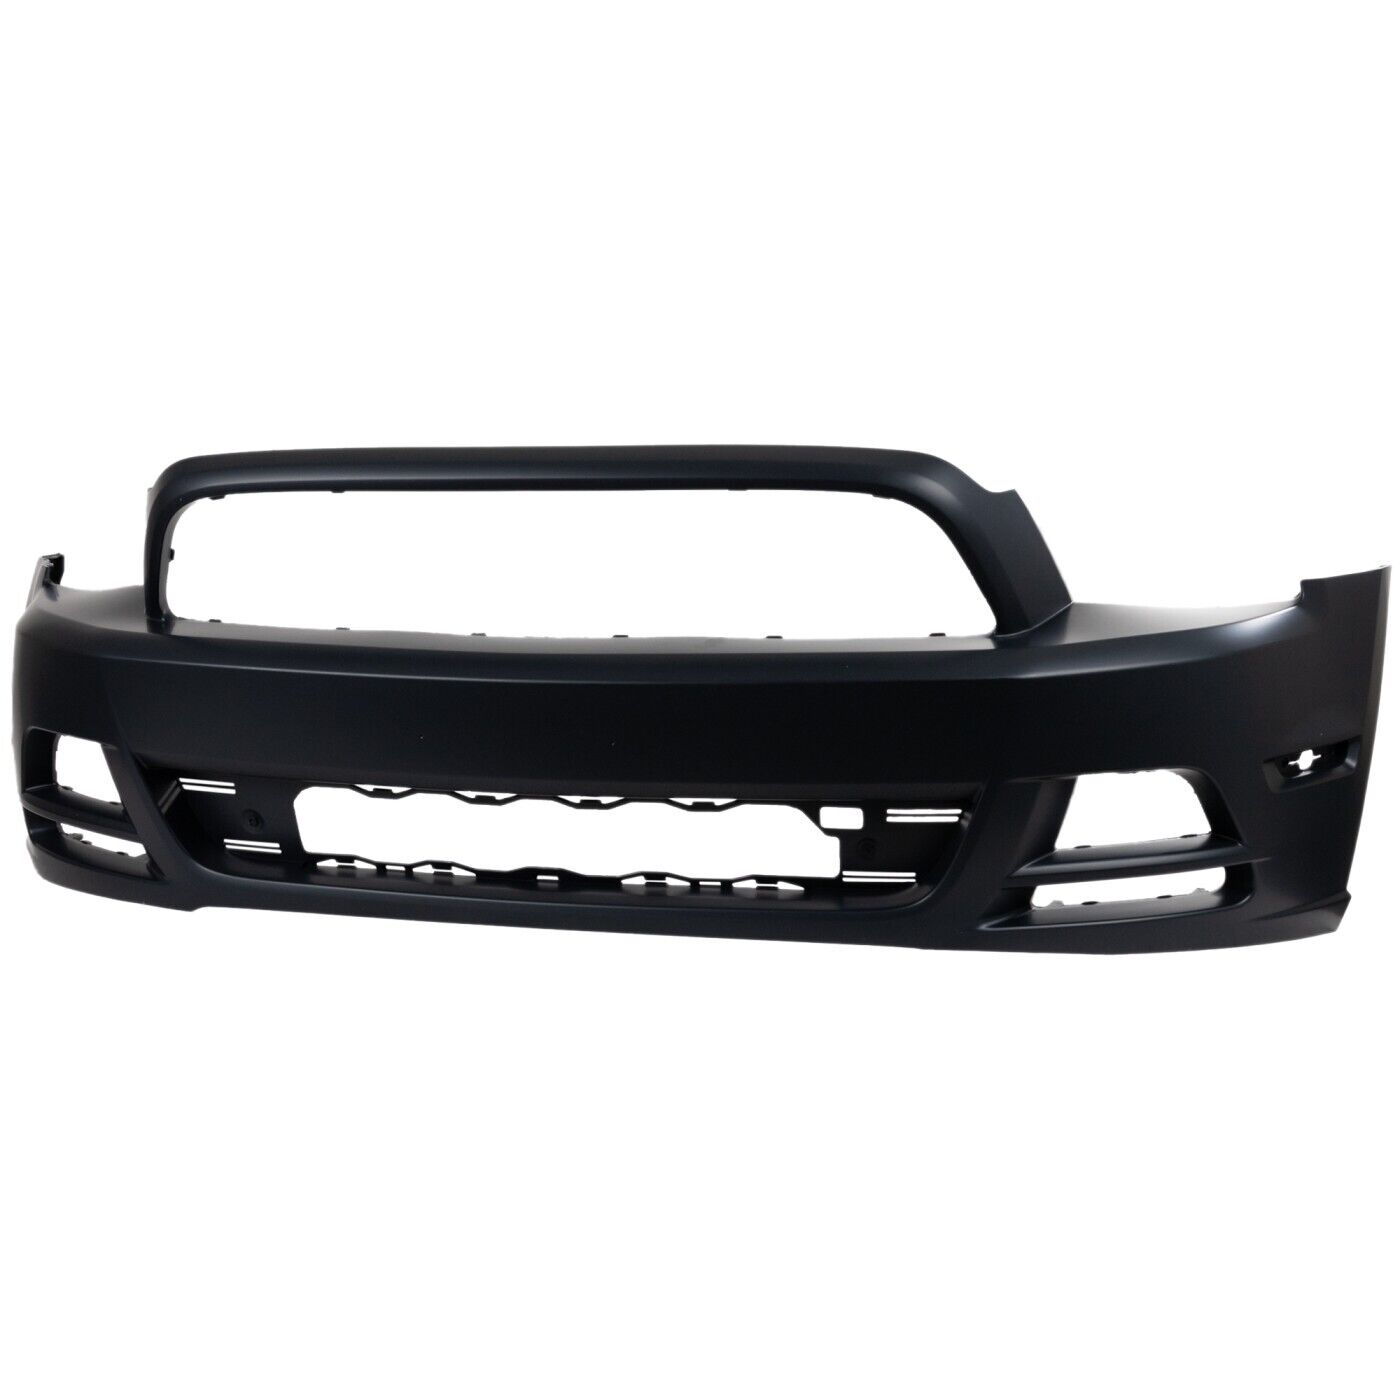 Front Bumper Cover For 2013 2014 Ford Mustang Boss 302 Base GT Primed